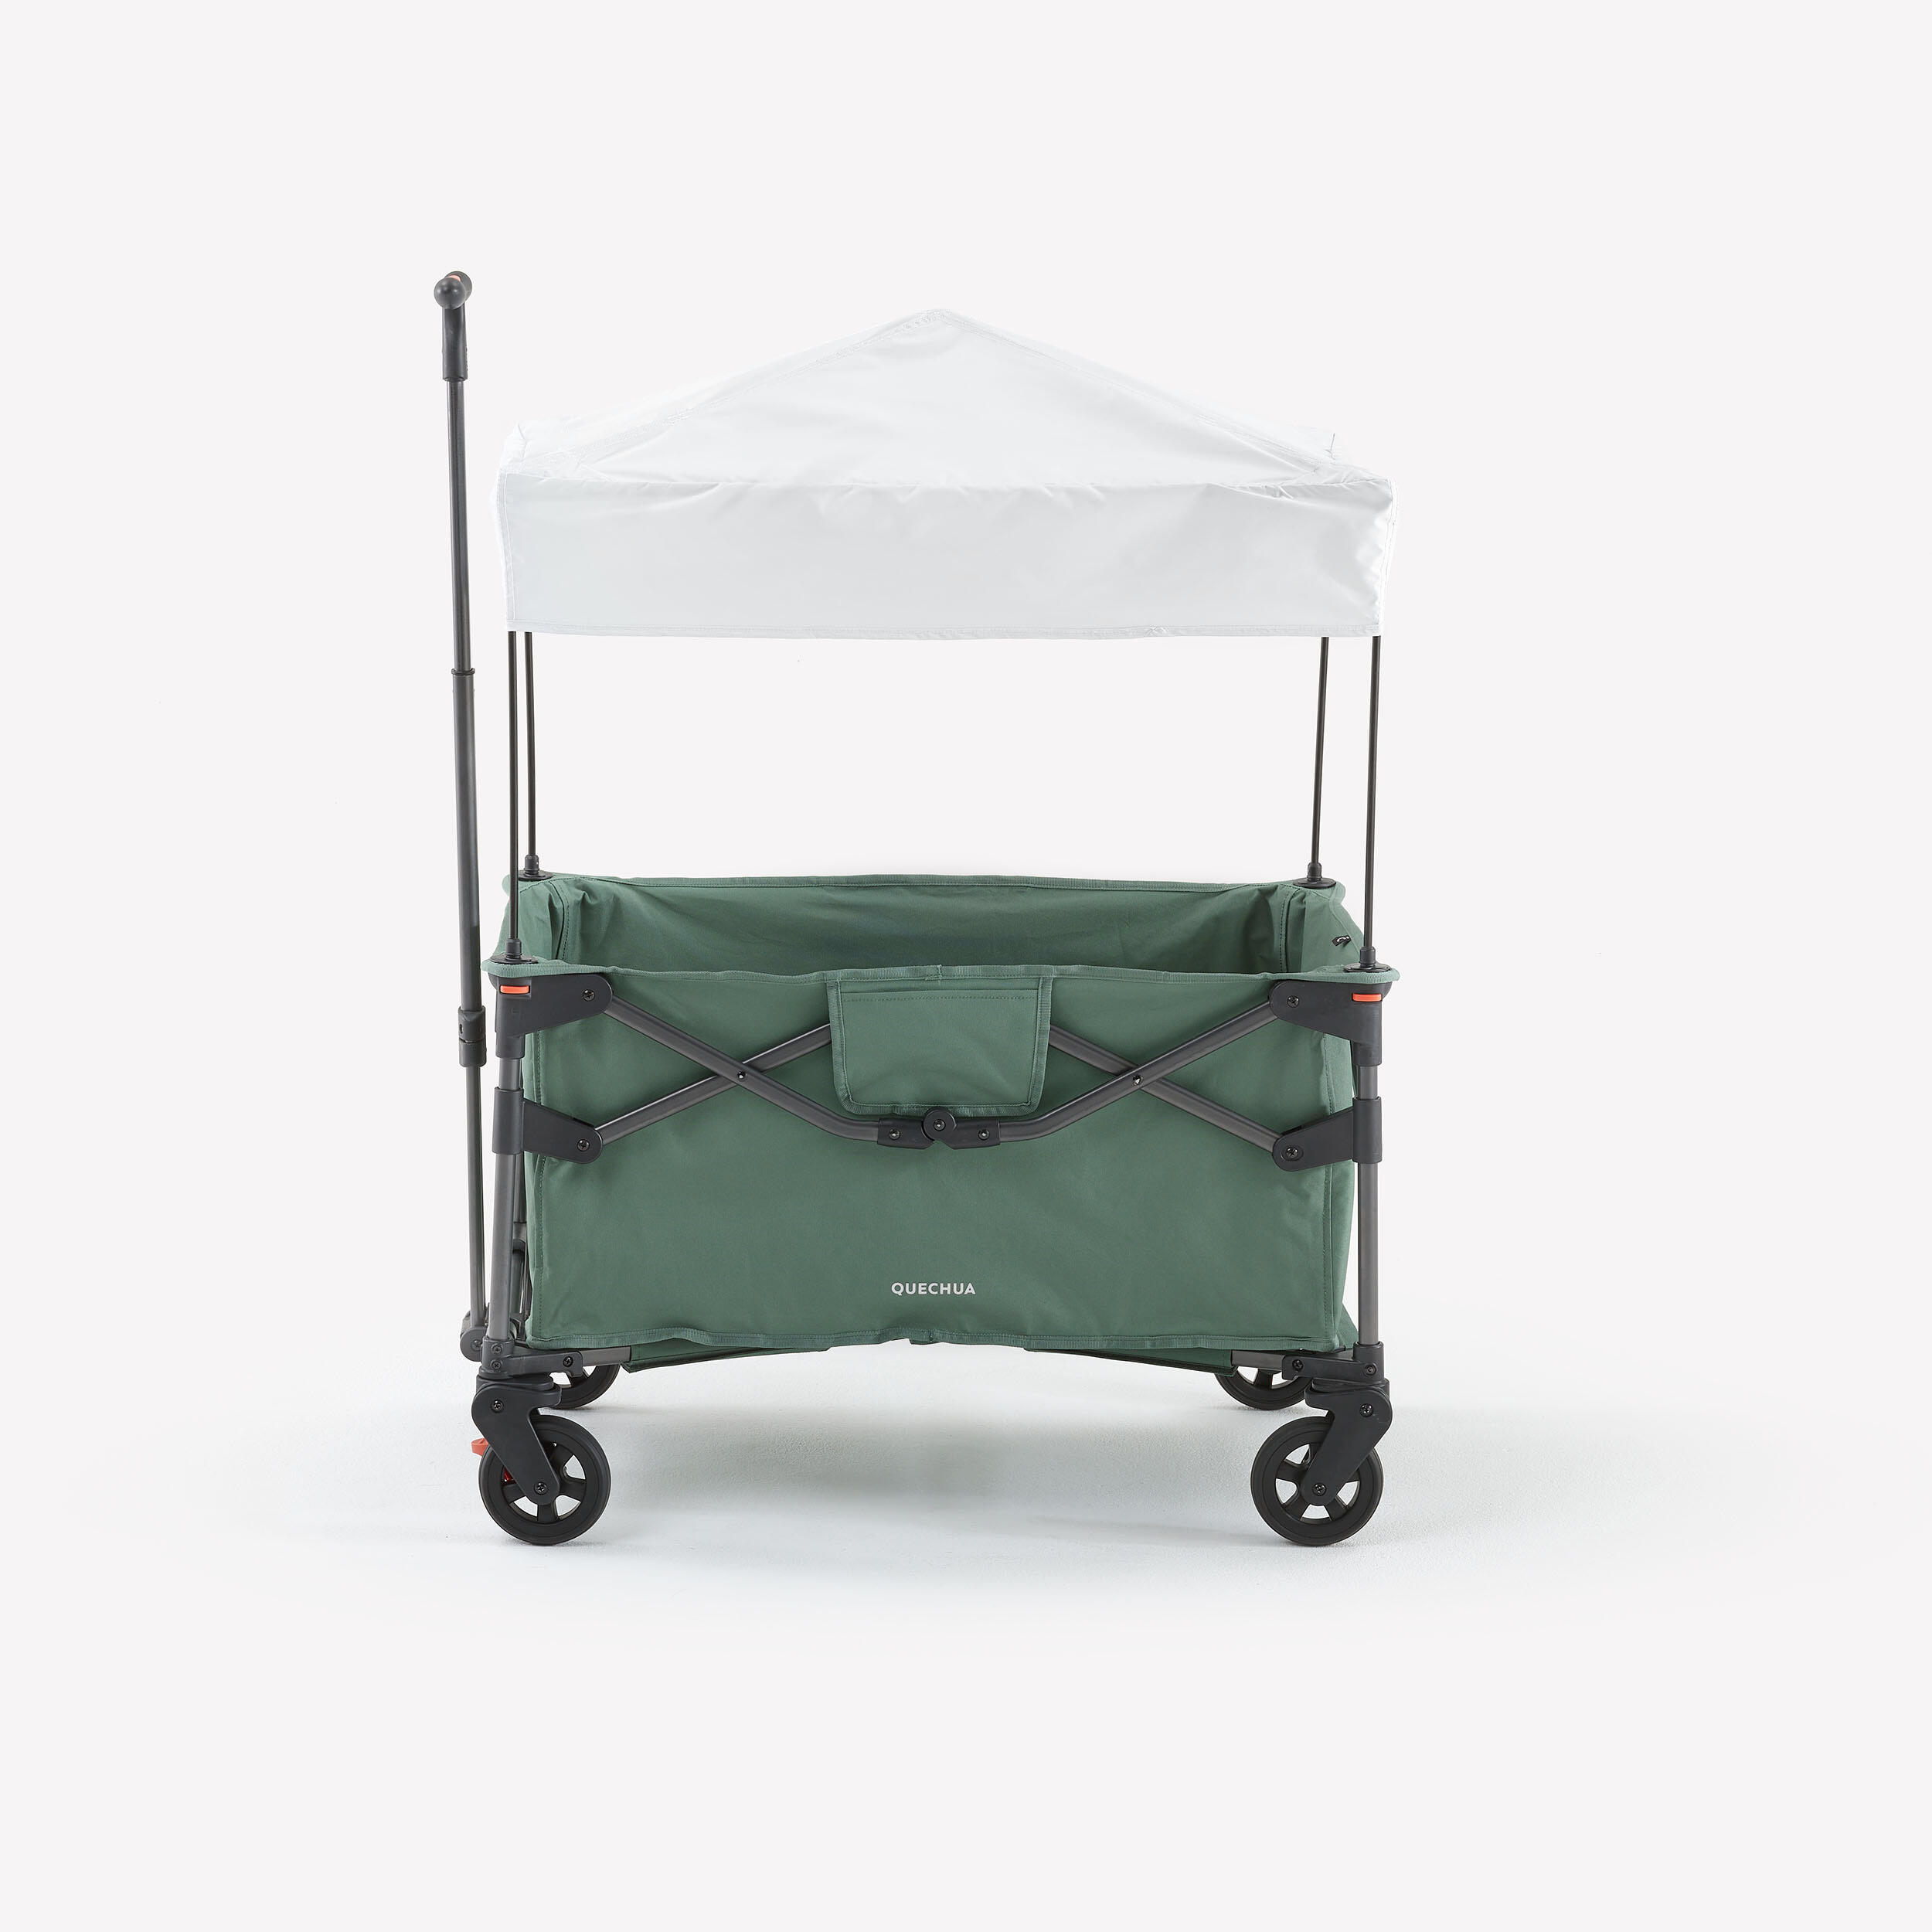 COMPACT TROLLEY FOR TRANSPORTING CAMPING EQUIPMENT - ULTRA-COMPACT TROLLEY 1/6